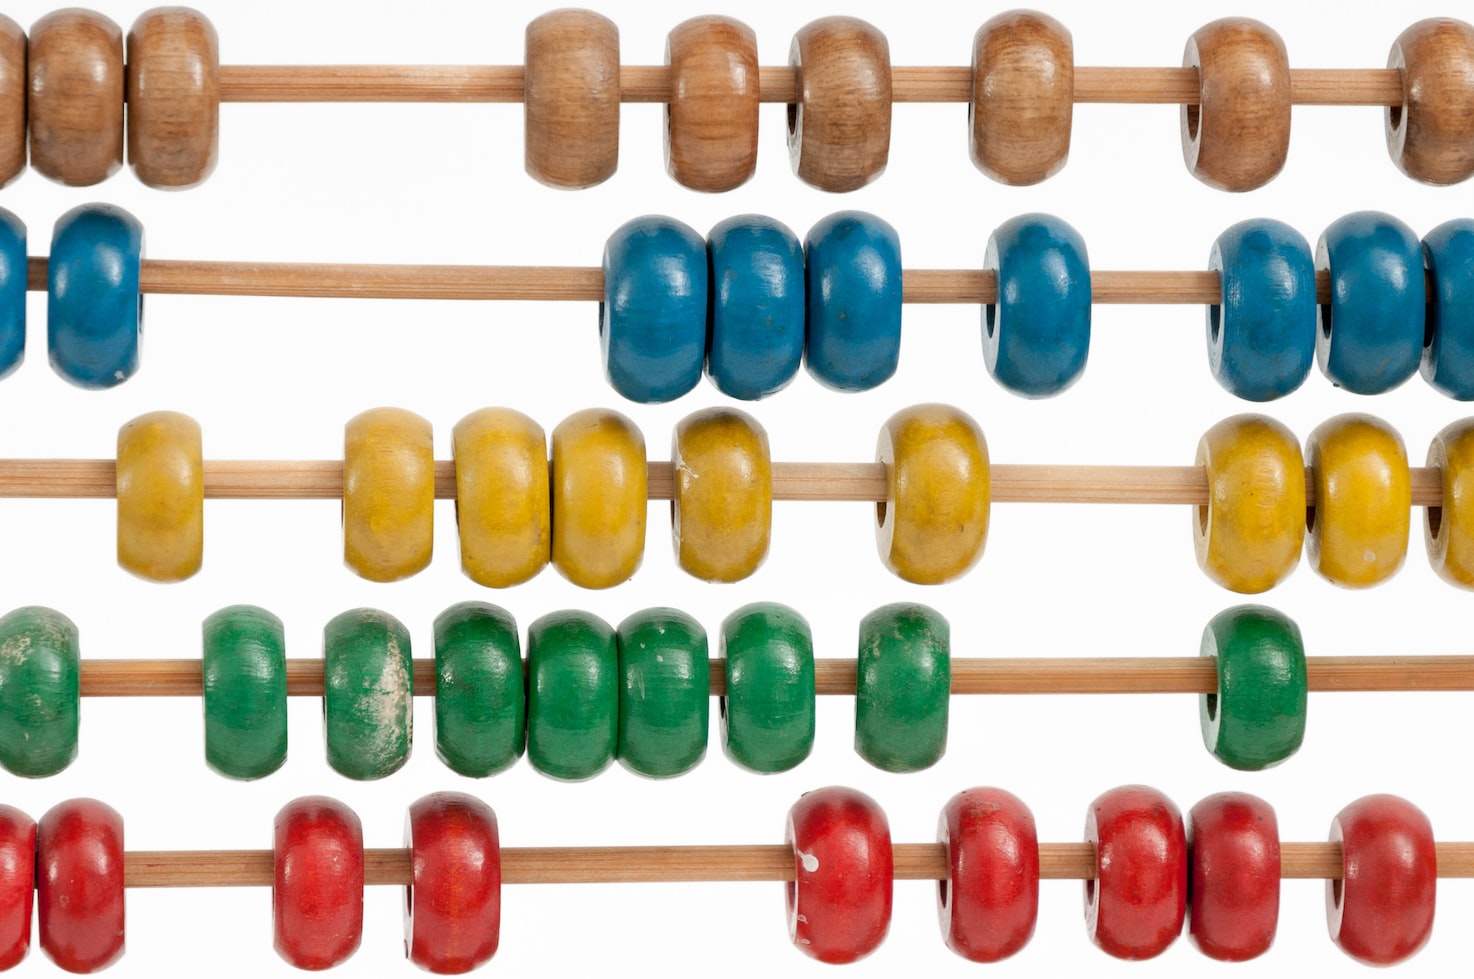 An abacus to symbolize measuring growing sales leads